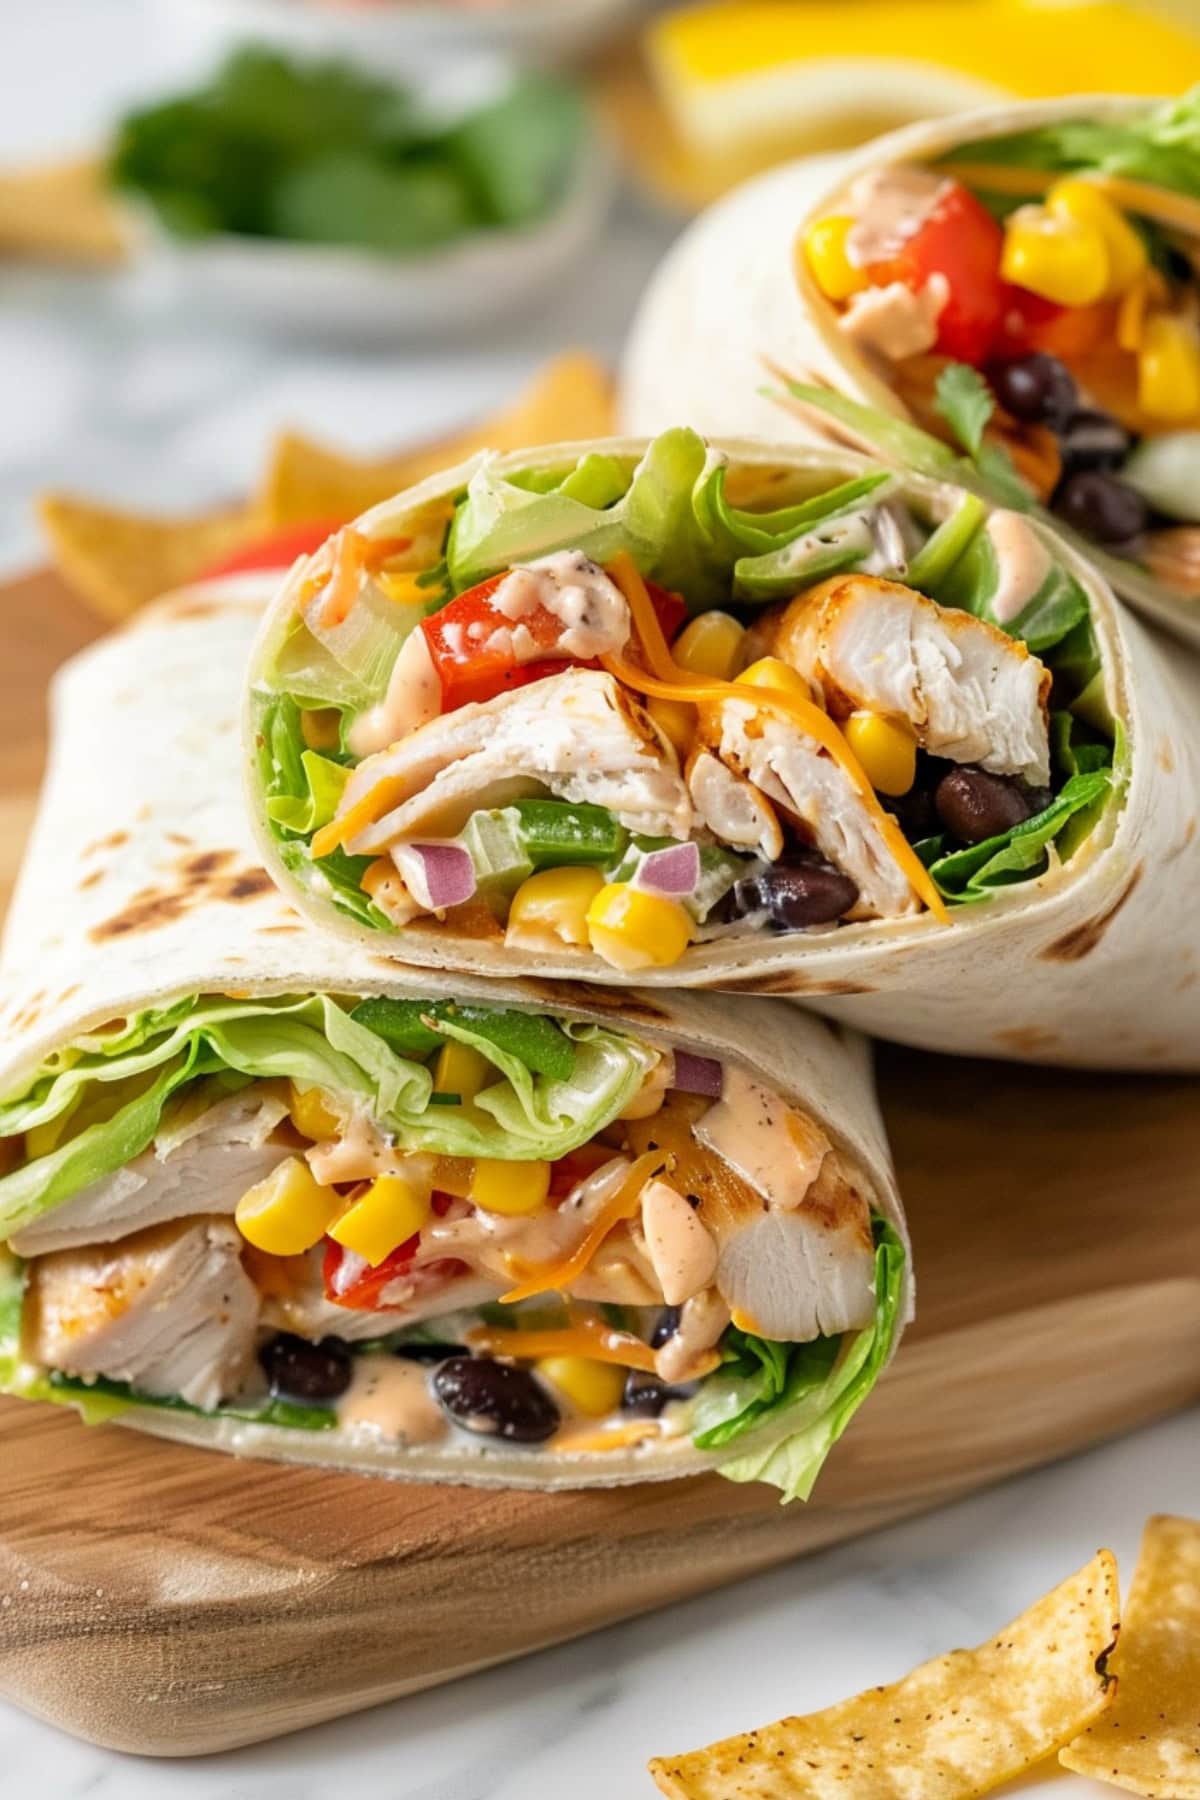 Sliced in half chicken wrap with sliced chicken, lettuce, black beans, corn, red bell pepper, onion, cilantro, tortilla strips and cheese with ranch sauce wrapped in flour tortilla arranged in a wooden board.